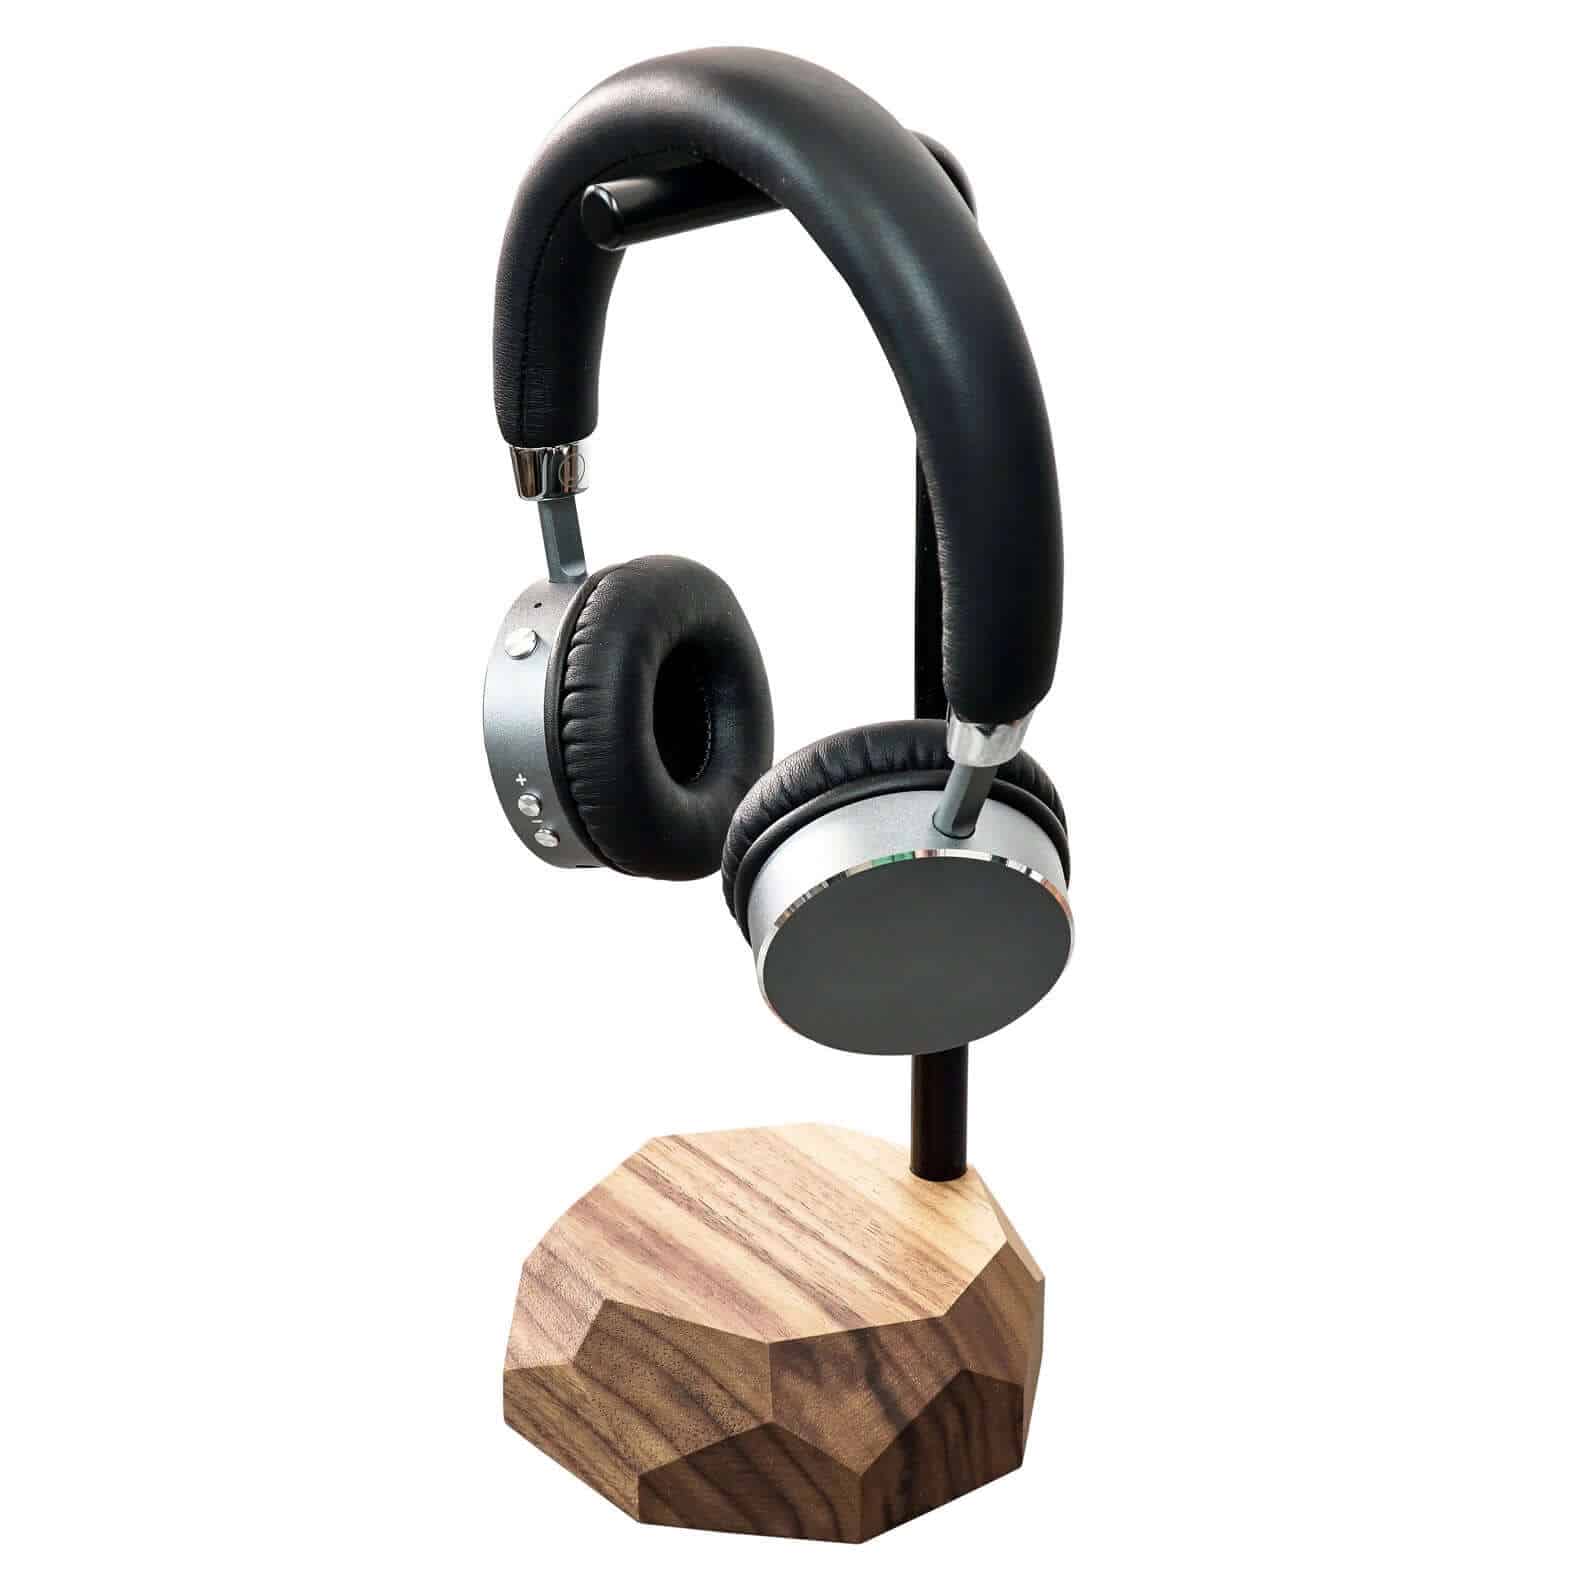 Wooden headphone stand